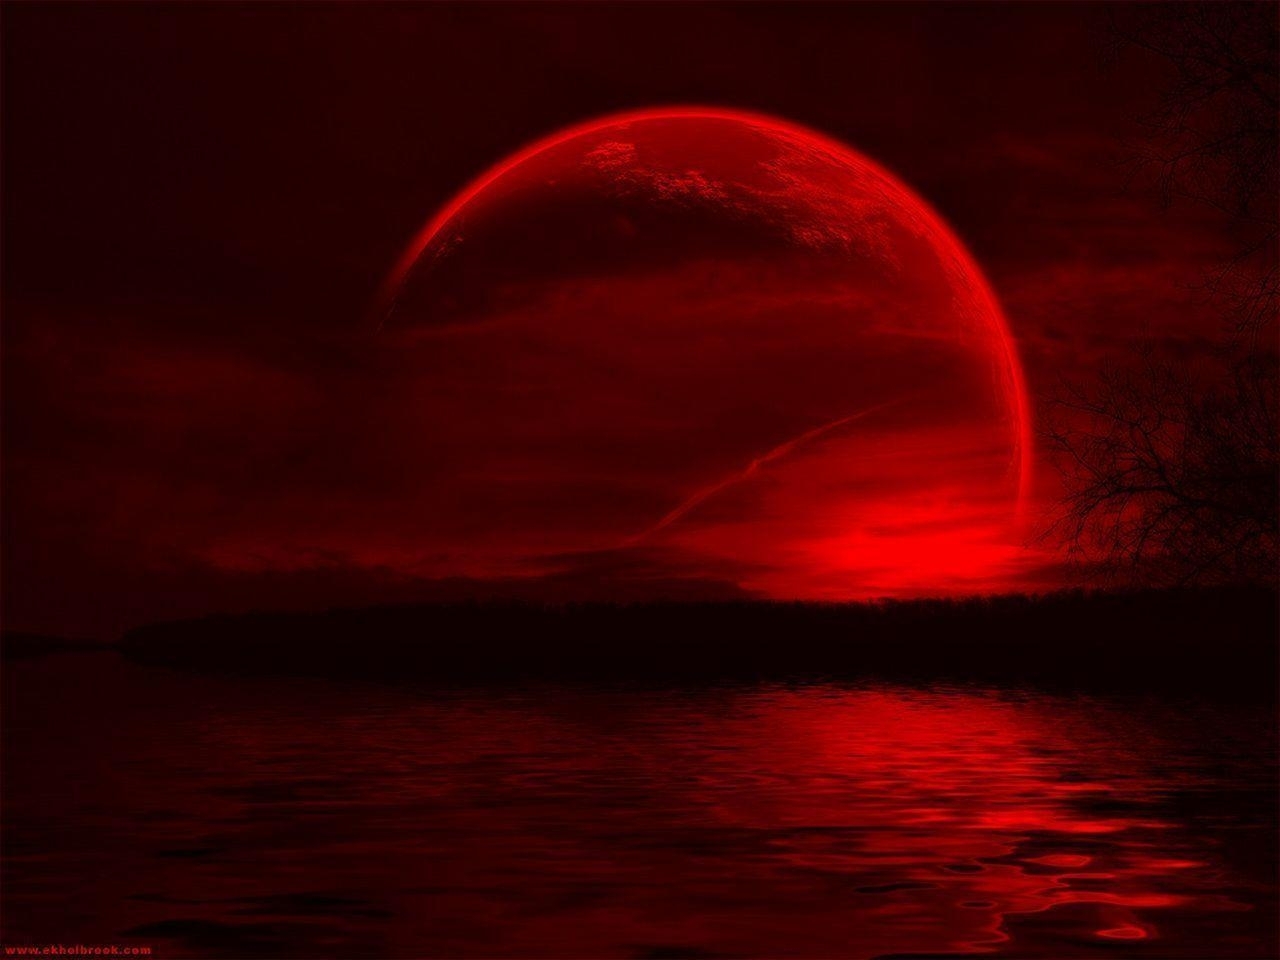 10 New Blood Moon Wallpaper Hd FULL HD 1080p For PC Background